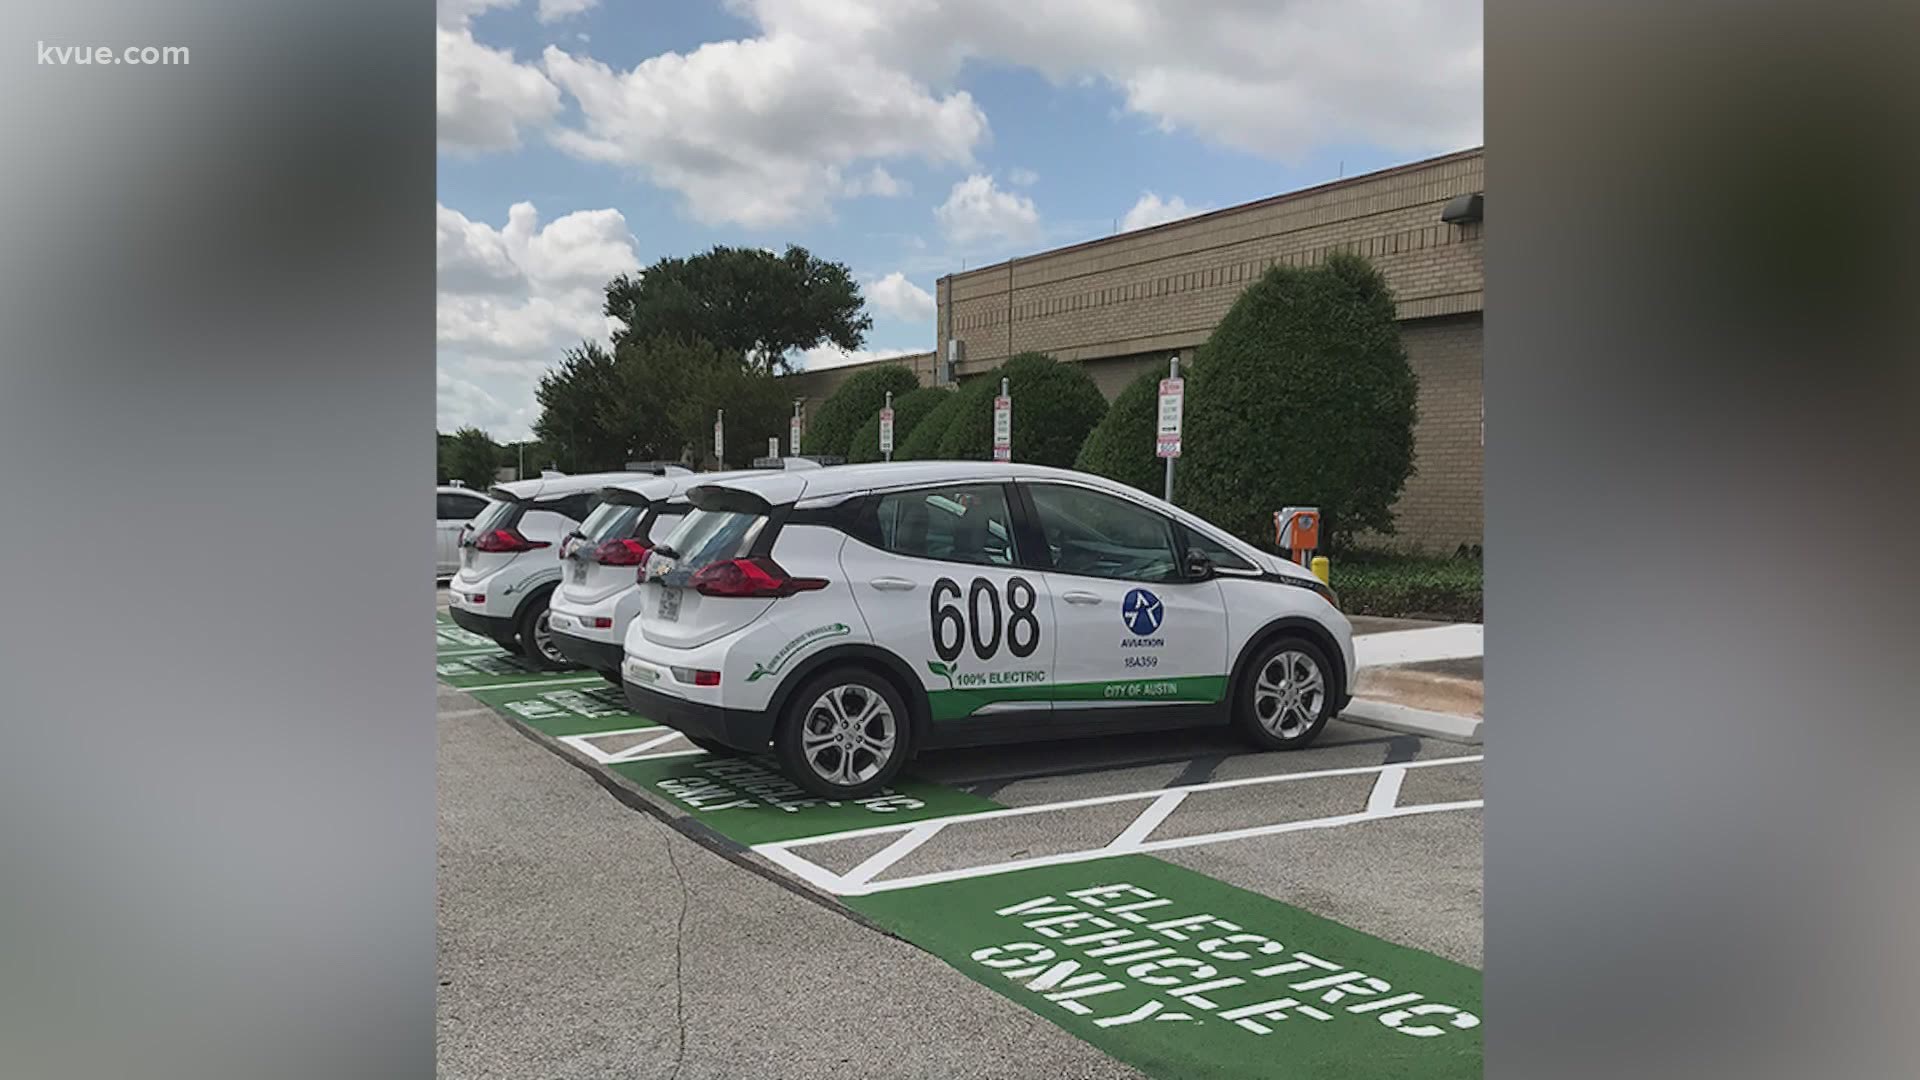 In Austin, crews will install more than 200 charging ports for electric cars around the city.